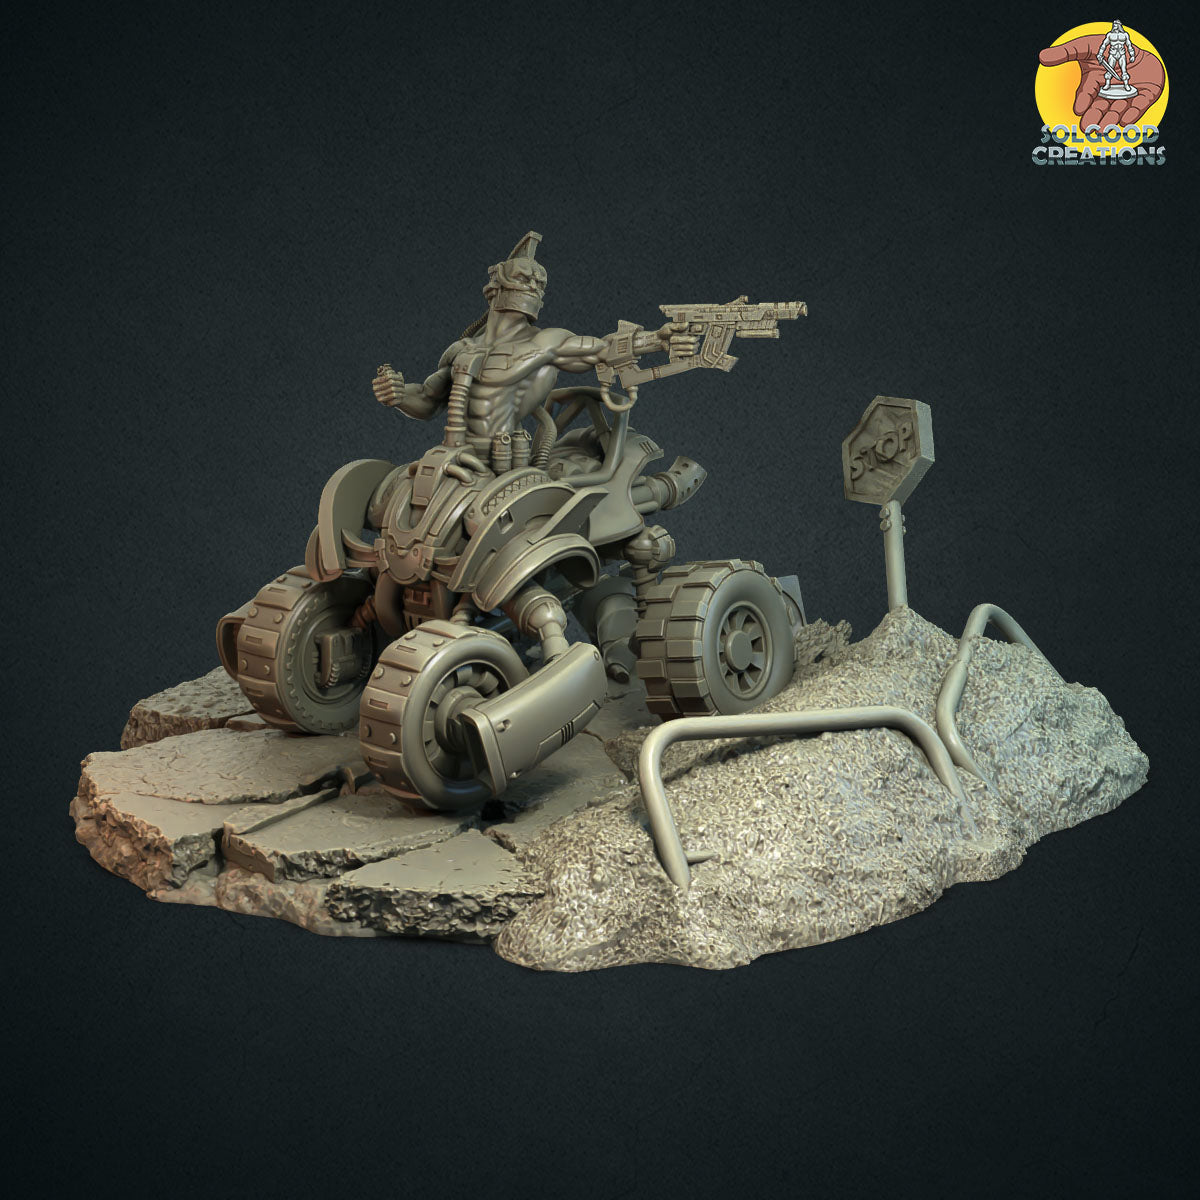 
                  
                    Miniatures - Solgood Creations - Kiros the Cyborg Four Wheeler - For Wargames and Tabletop Games,  Collectors, and Painters
                  
                